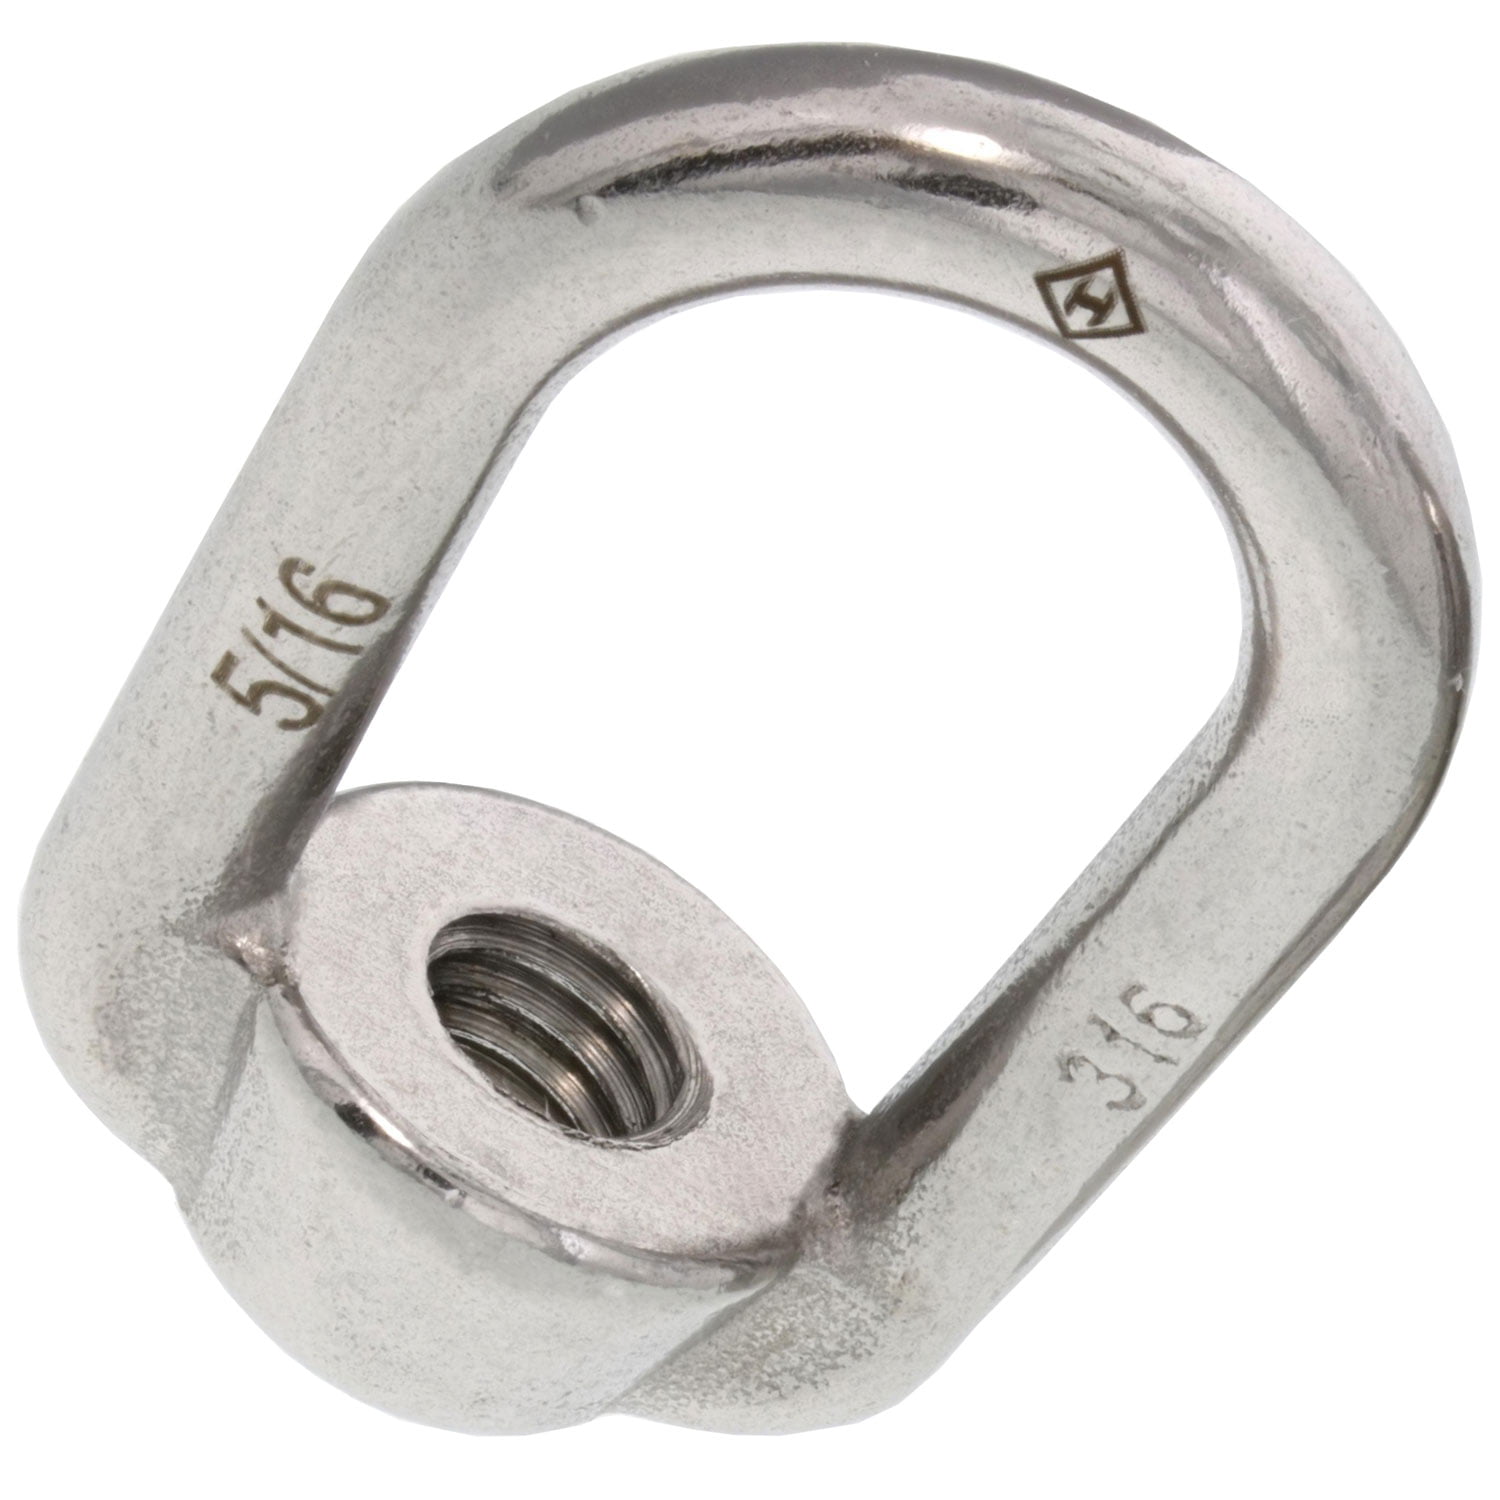 5/16 Chicago Hardware Drop Forged Hot Dip Galvanized Eye Nut with 1/4 Bail